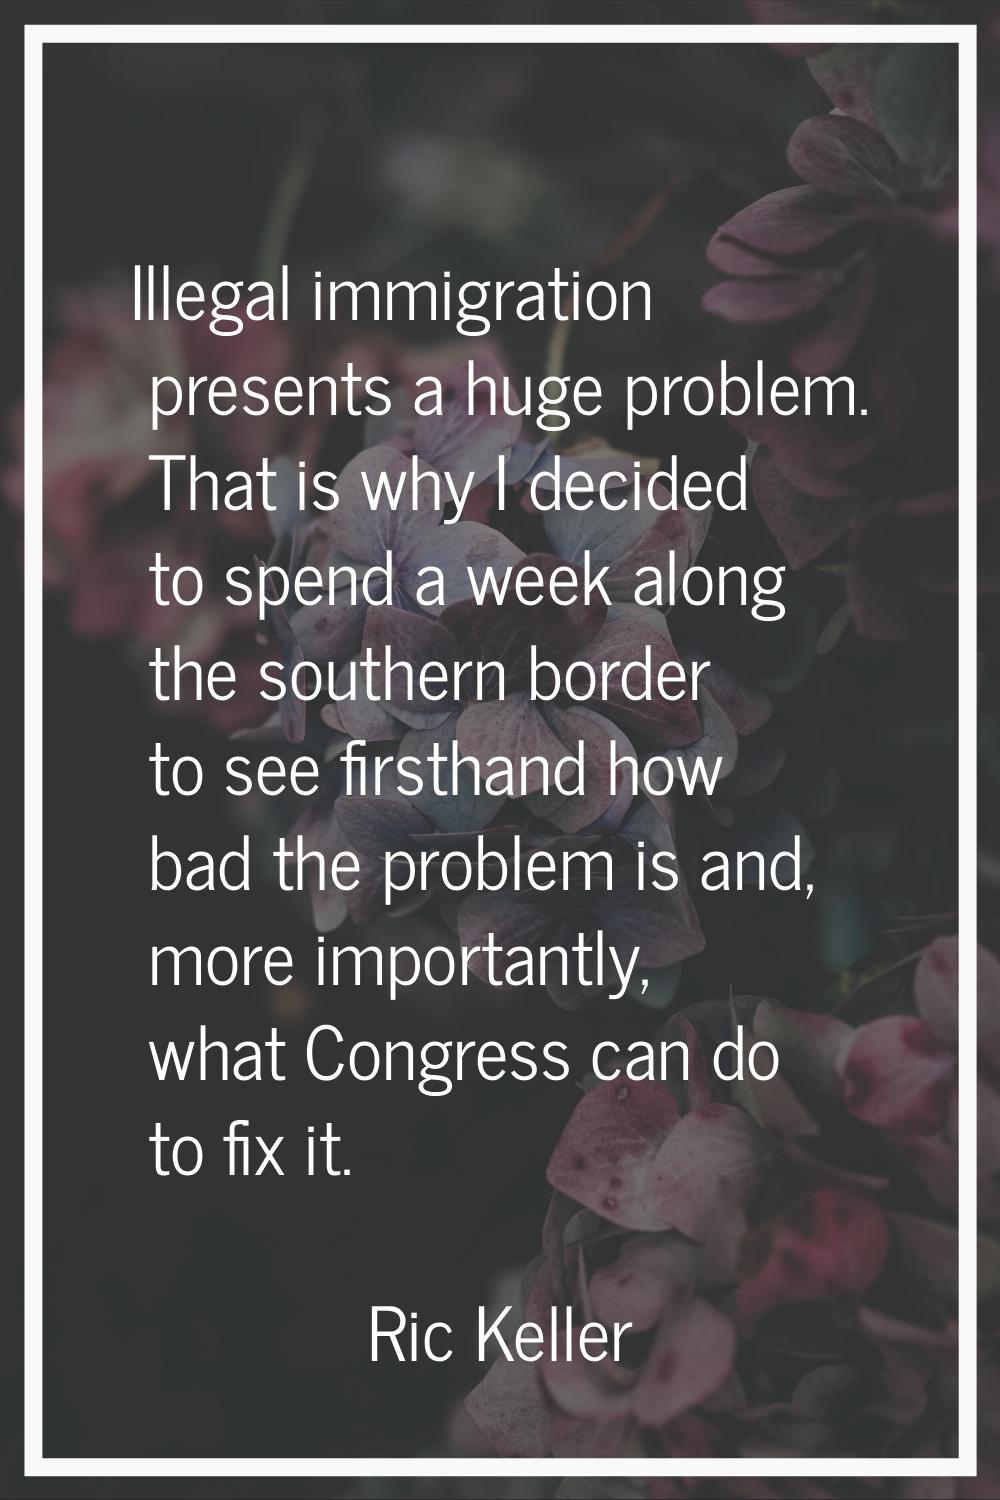 Illegal immigration presents a huge problem. That is why I decided to spend a week along the southe